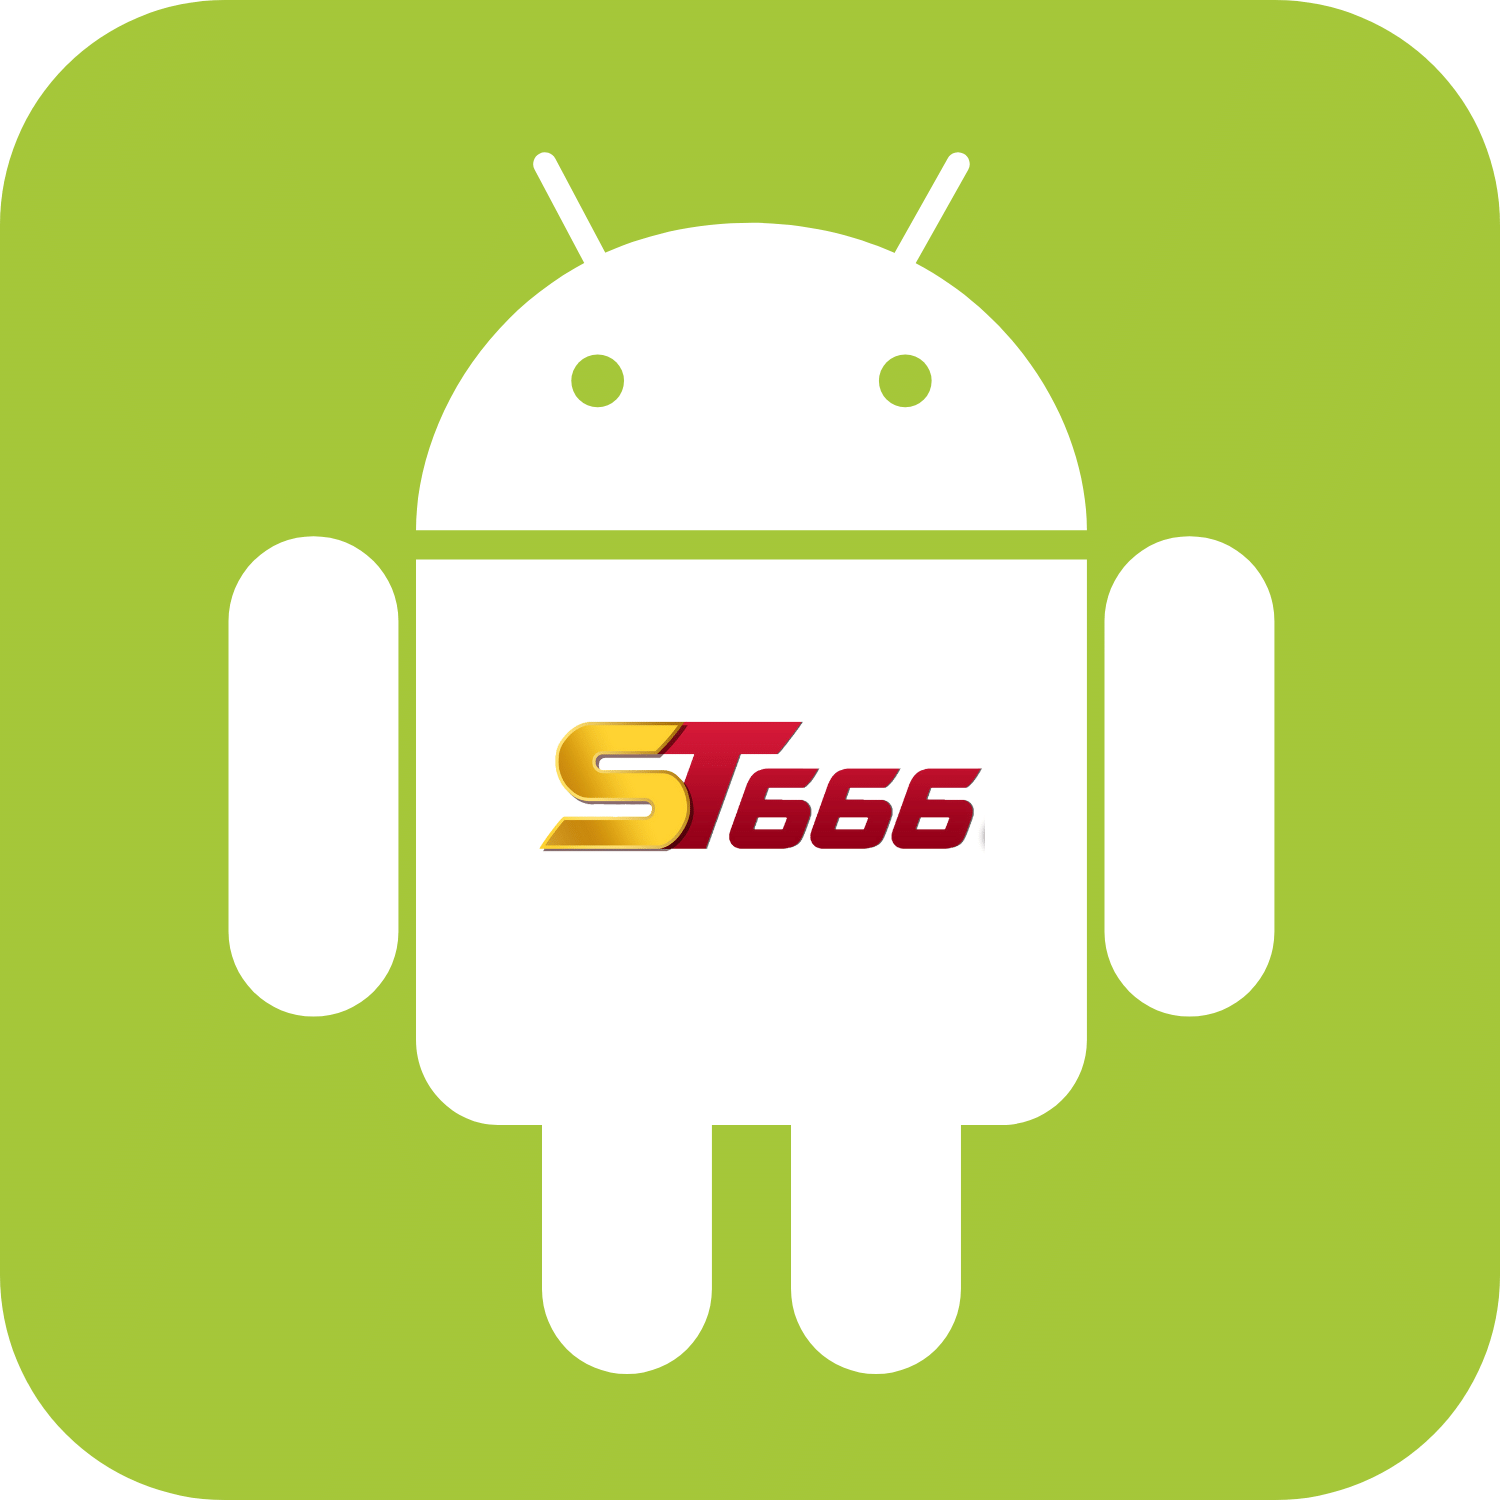 Tải App St666 Android